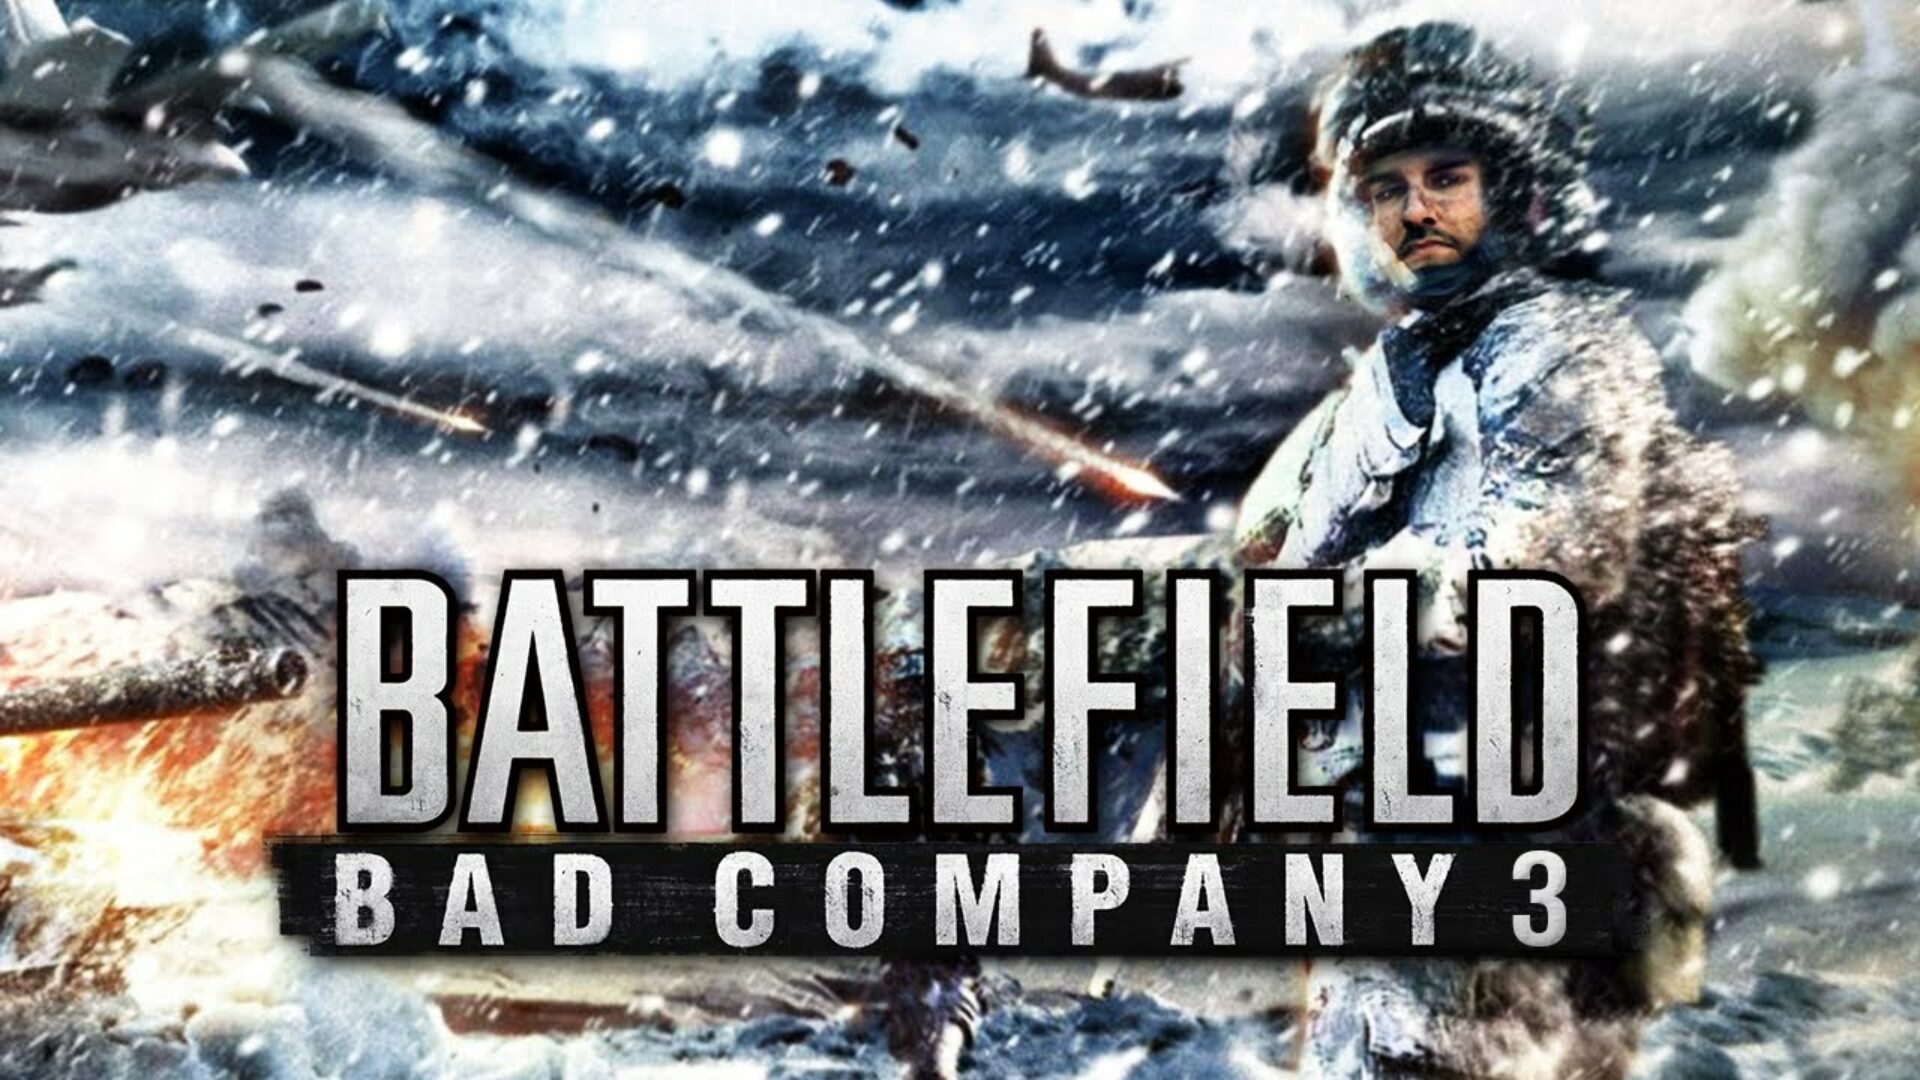 Could Battlefield Bad Company 3 Come Out Soon?